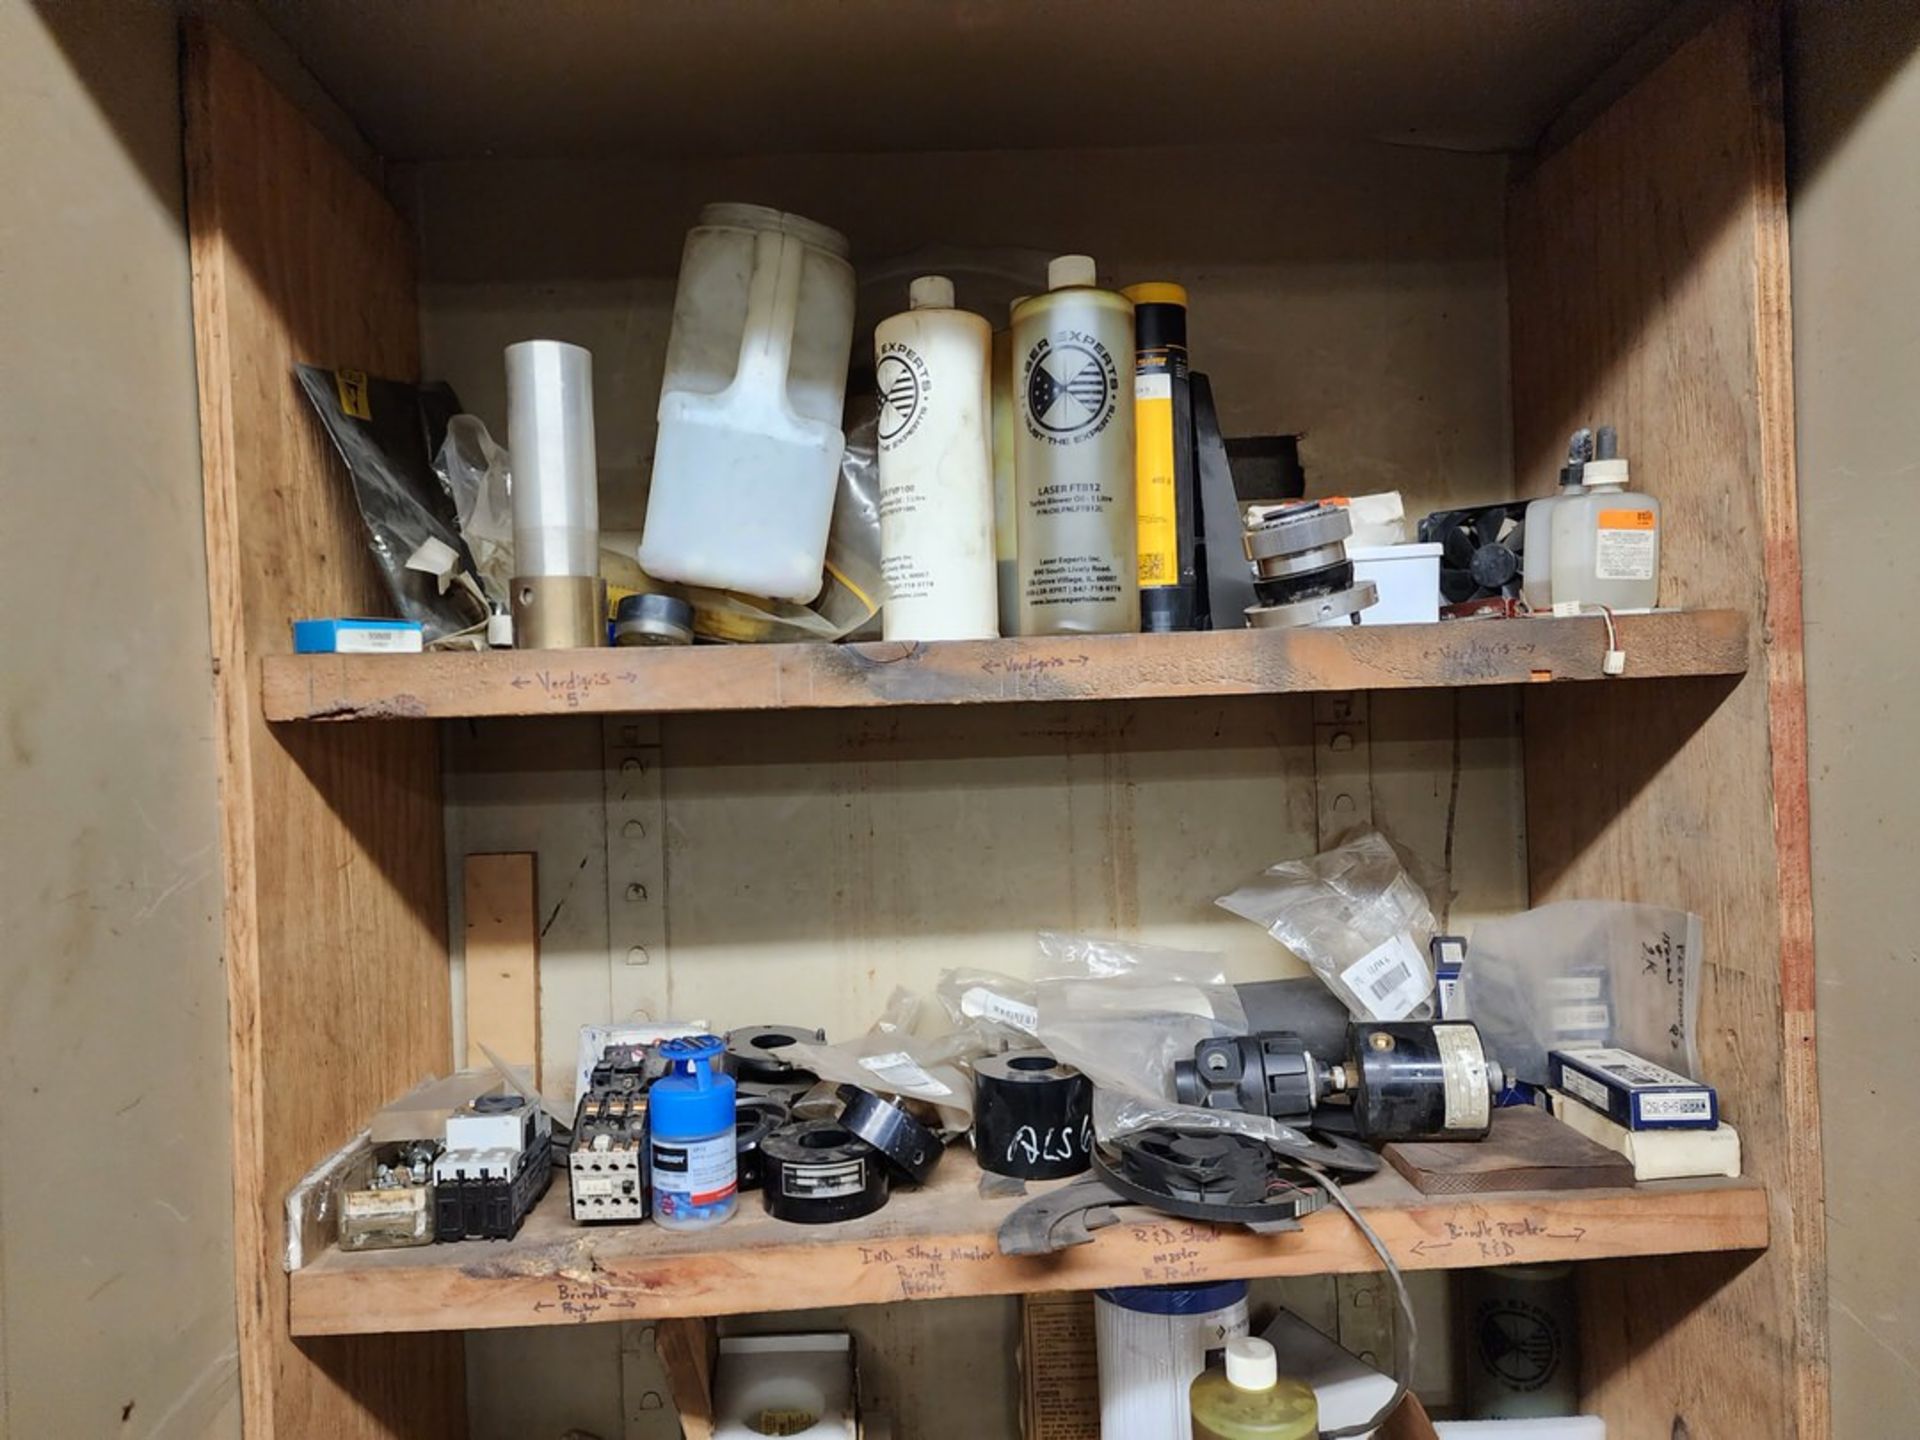 Contents Of Room To Include But Not Limited To: (4) Matl. Lockers, Assoreted Ele Components, - Image 47 of 58